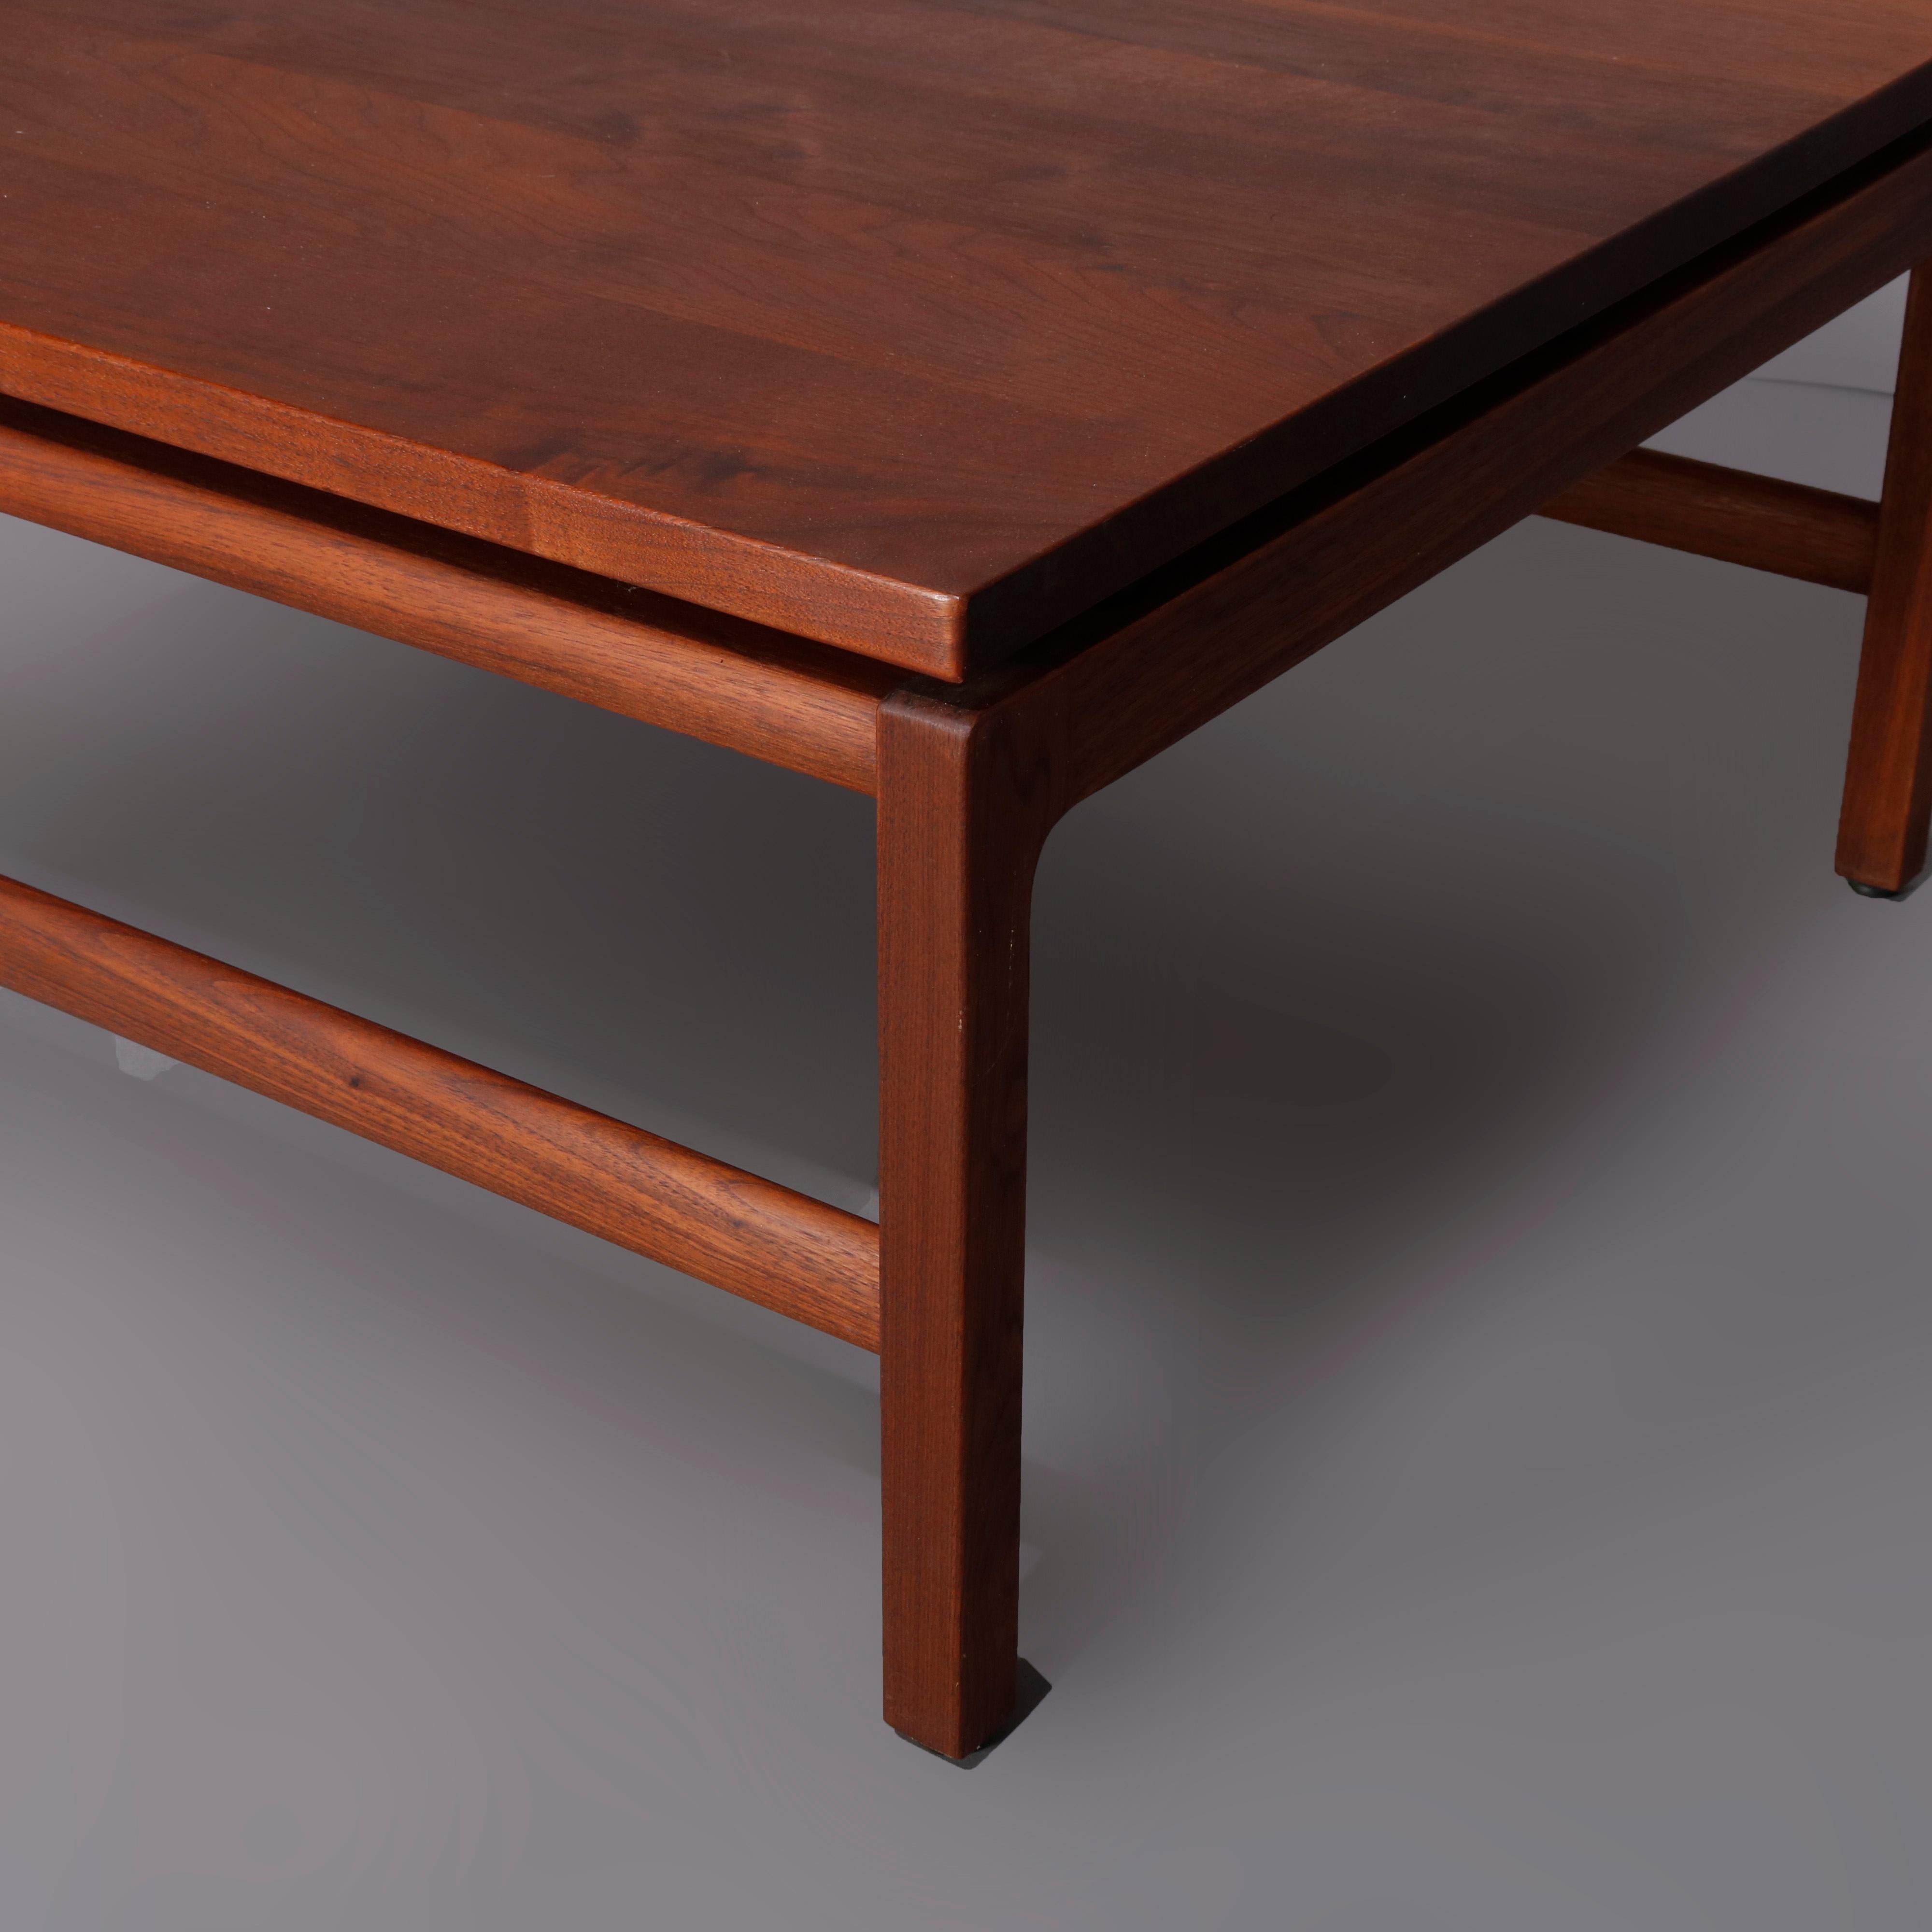 A midcentury Danish modern coffee table by Gunlocke offers walnut construction with elevated square top surmounting base having straight and squared legs with H-stretchers, Gunlocke New York, mid-20th century.

***DELIVERY NOTICE – Due to COVID-19